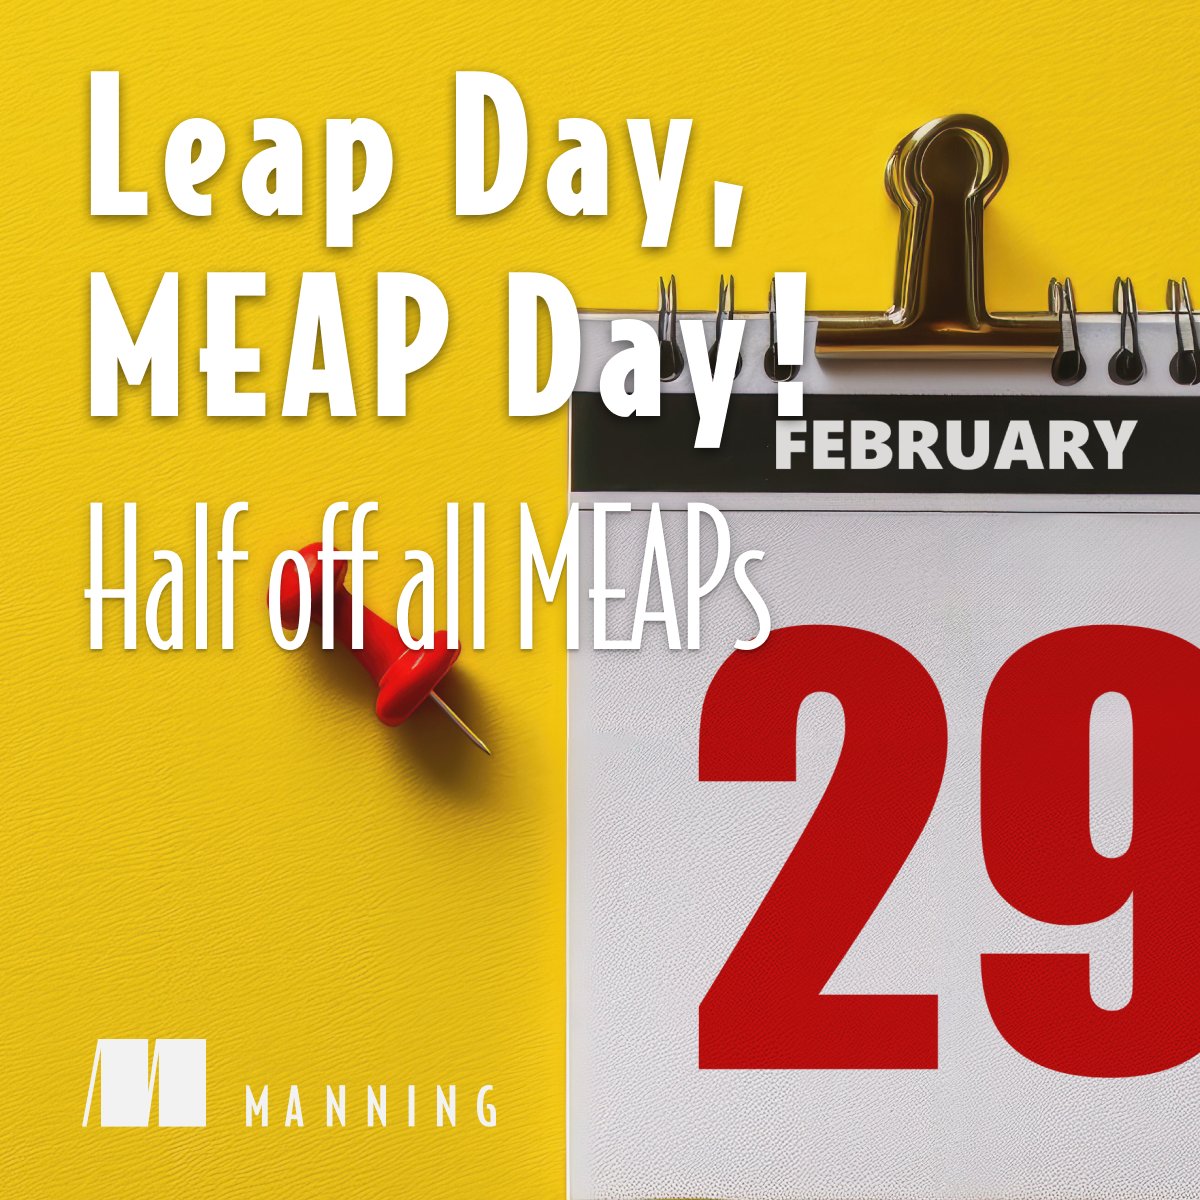 🌟 Leap Day, MEAP Day! 🌟
https://t.co/Rj4i1rrTDc

TODAY ONLY - Save 50% on all MEAPs!

February 29 only comes around every four years, so here’s something special to mark the occasion. All 109 MEAPs are half off today only!

#ManningBooks #LearnwithManning 